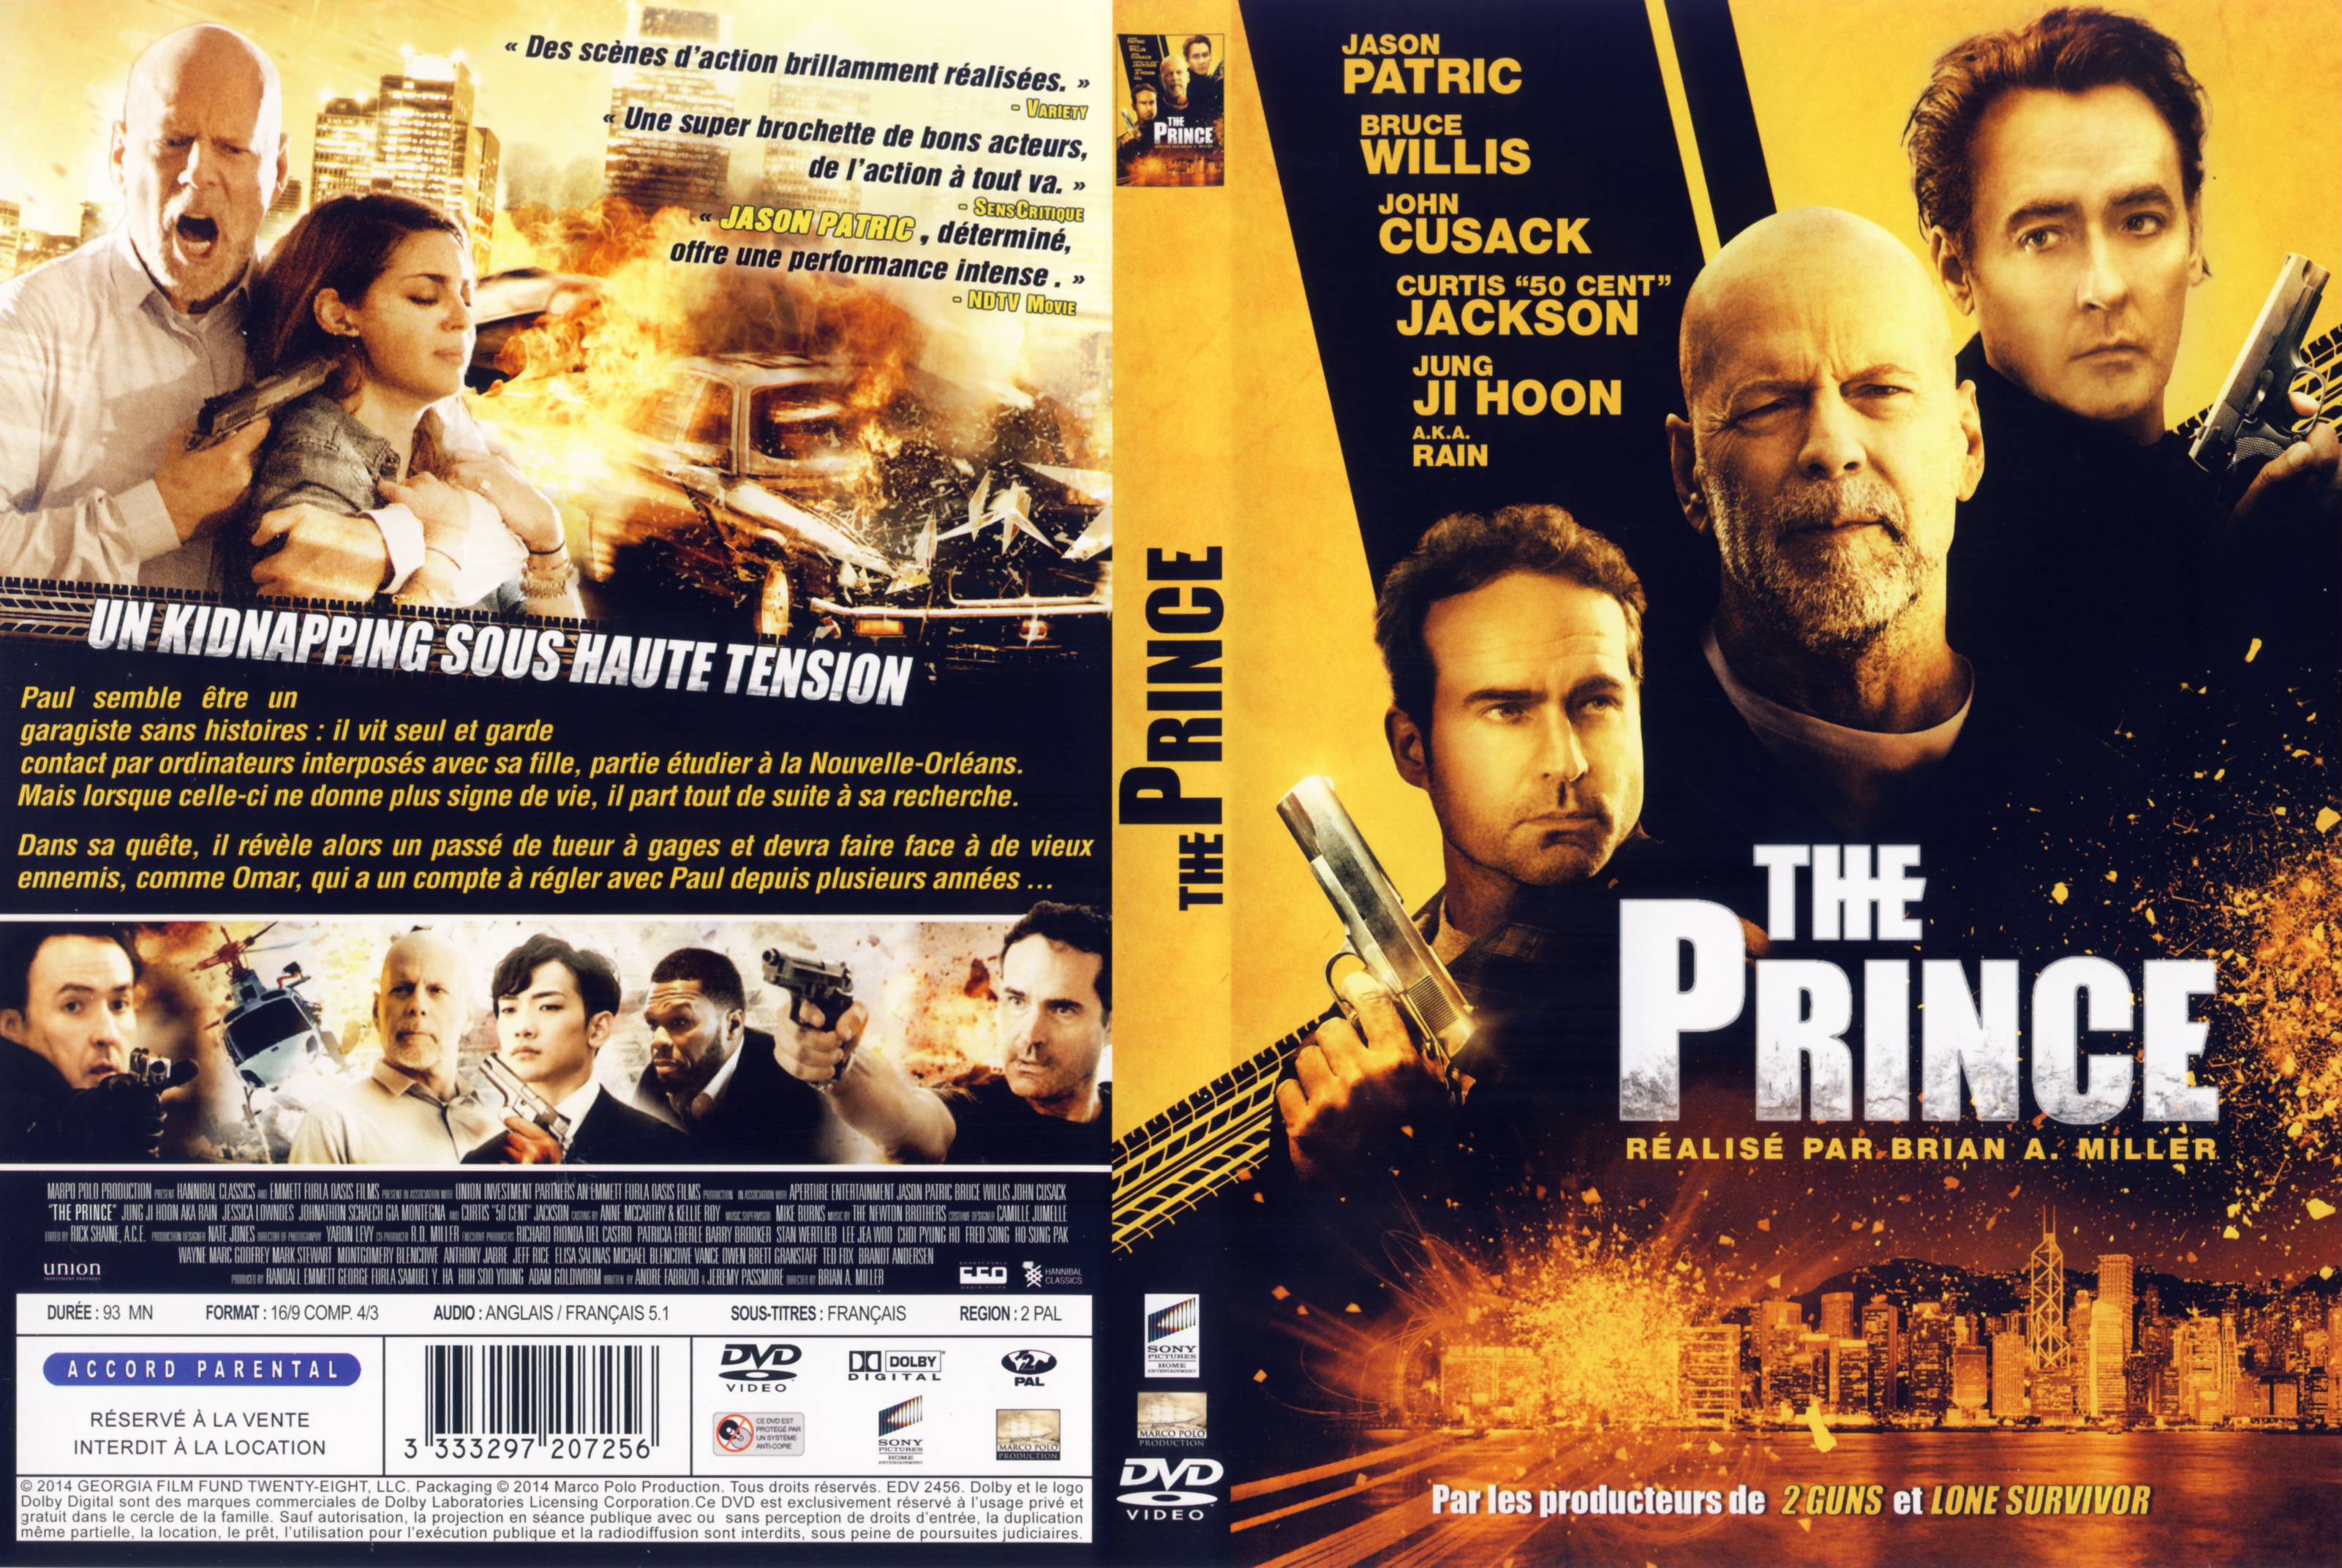 Jaquette DVD The Prince